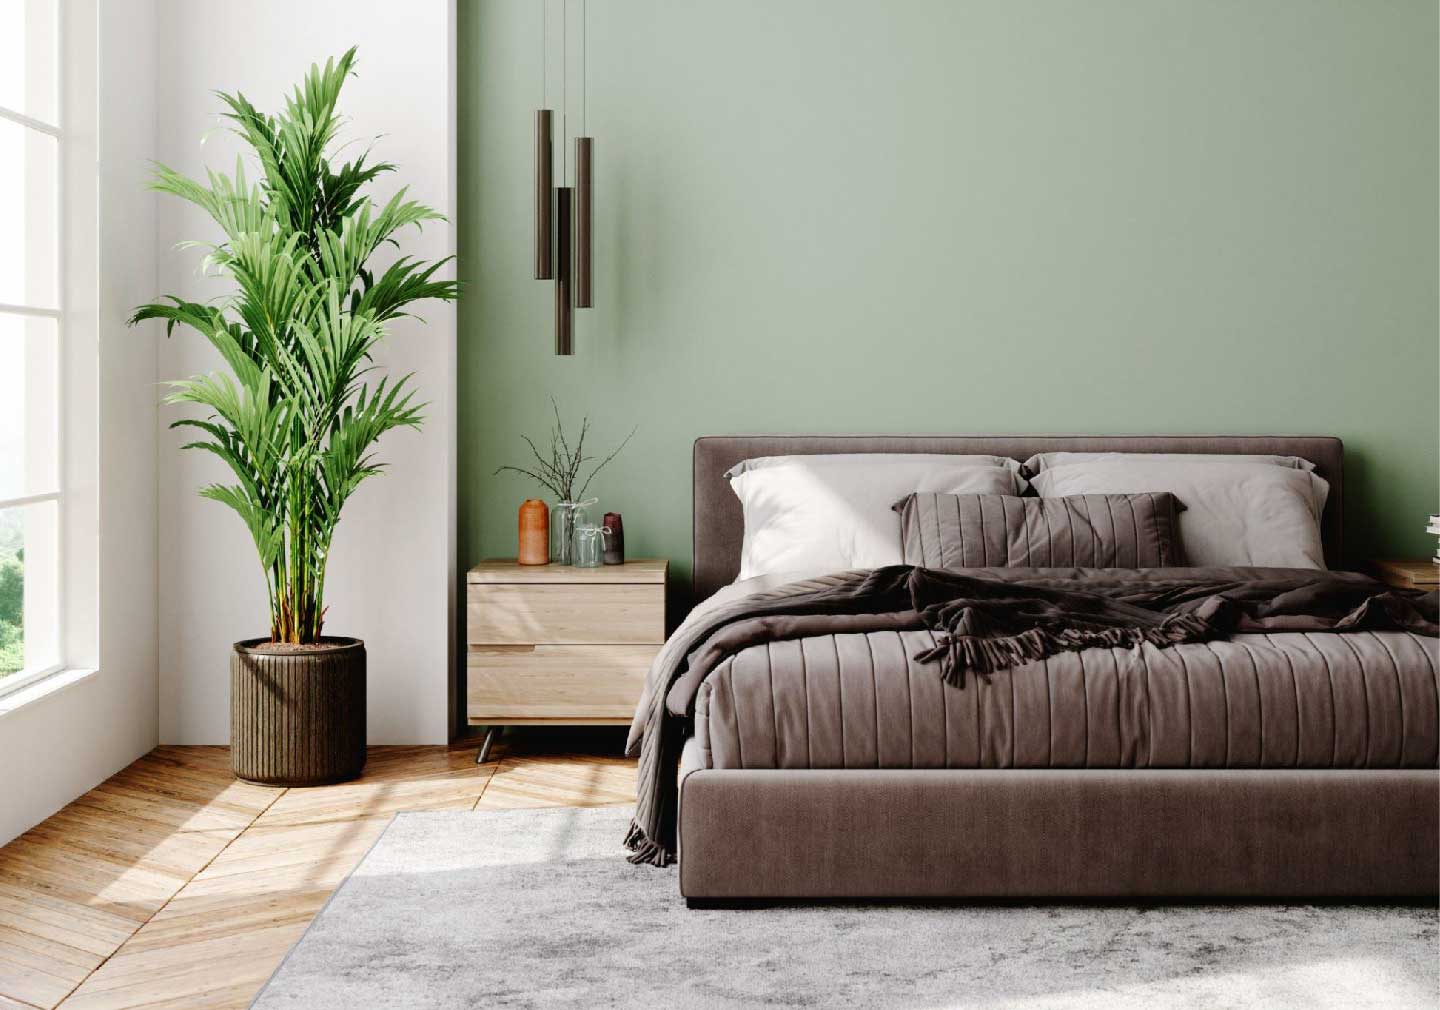 Plants to welcome green pastels